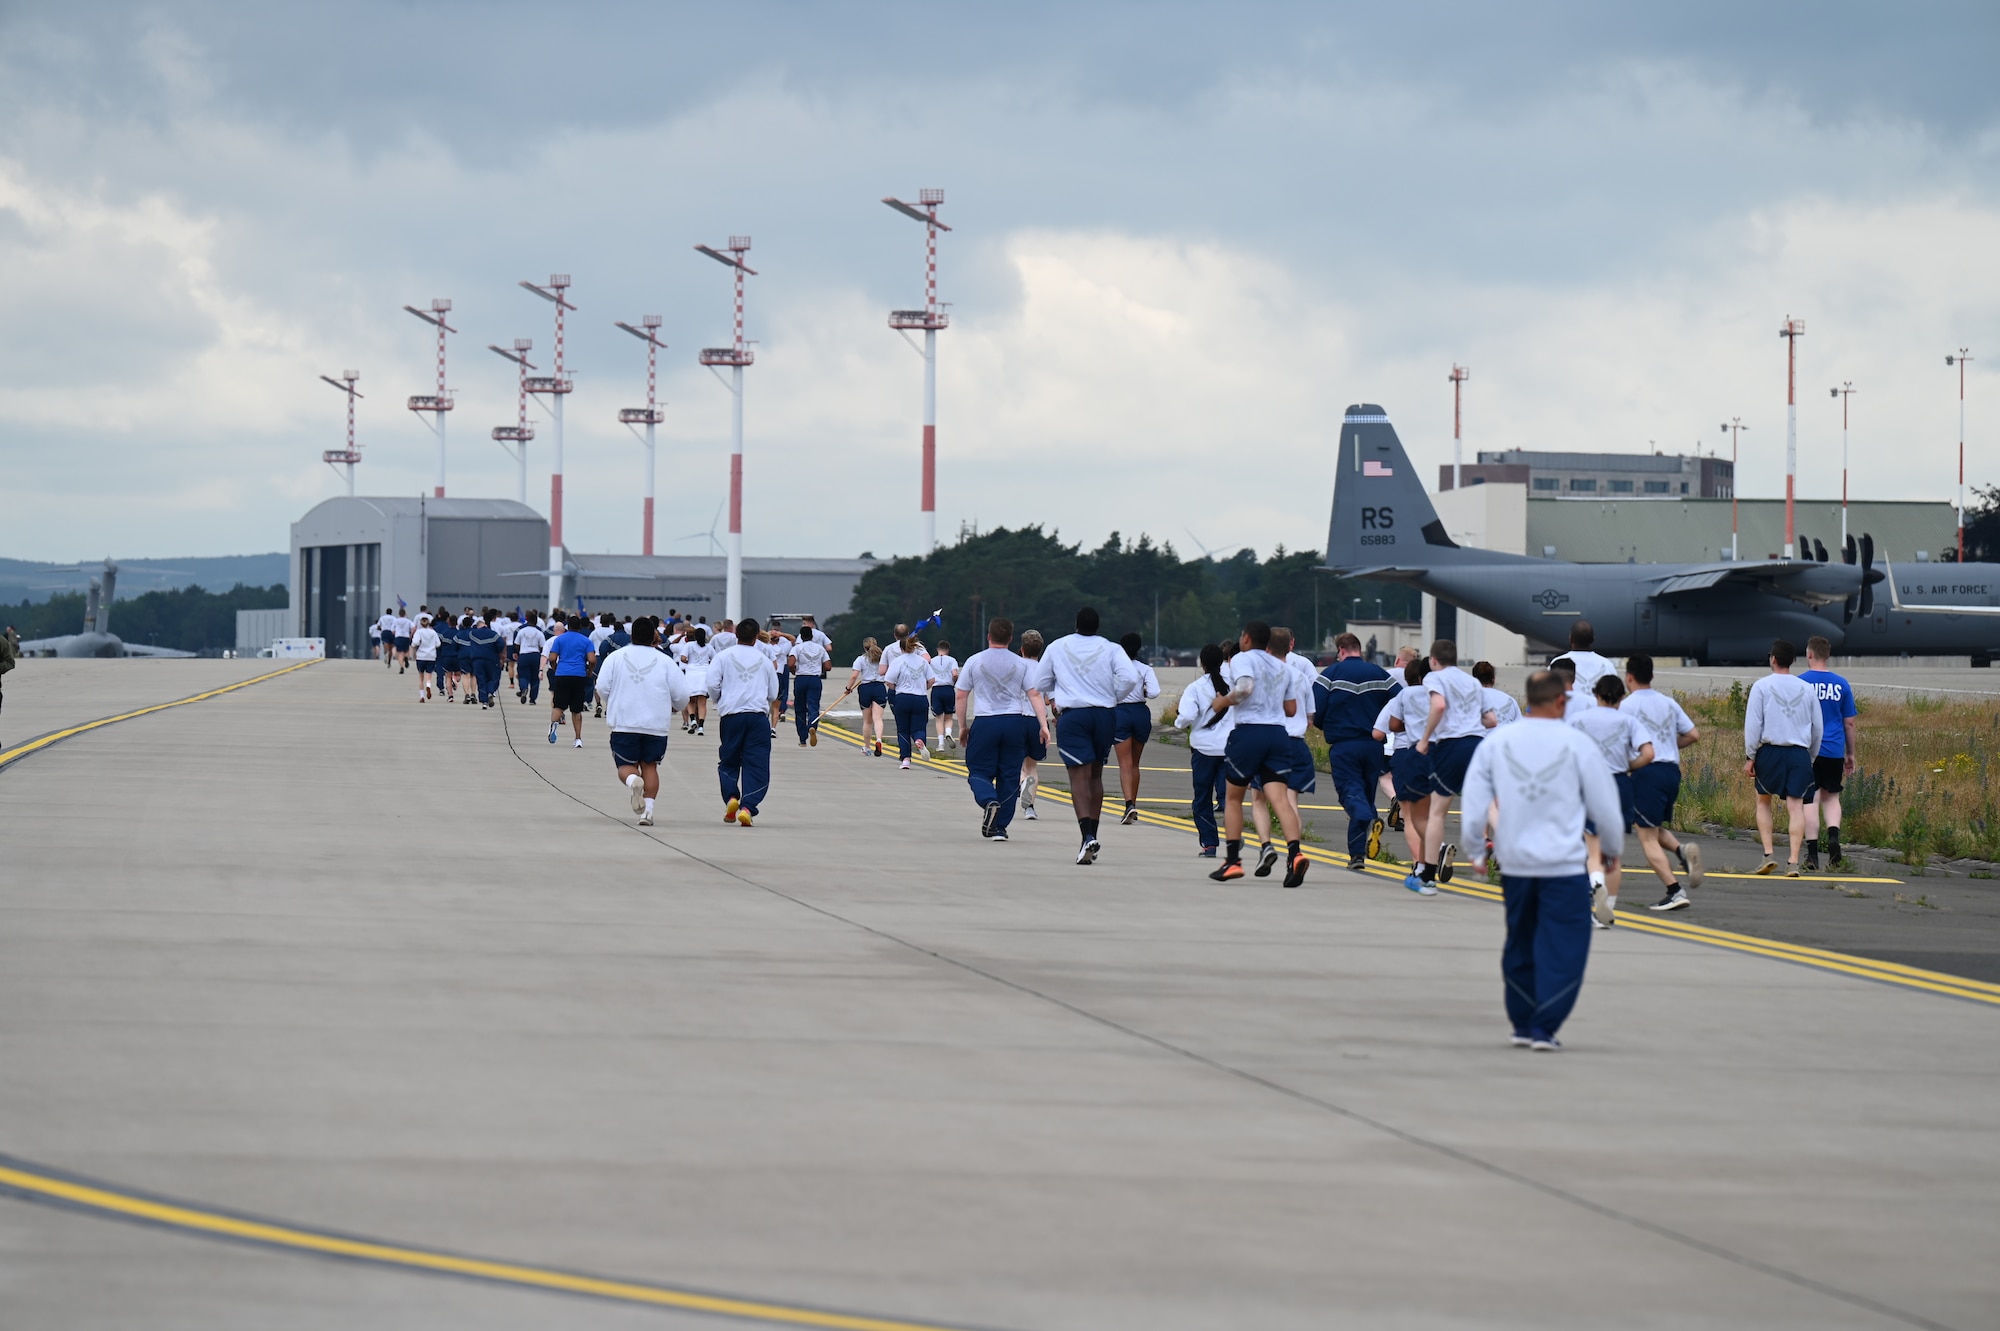 U.S. Air Force Airmen run toward the finish line of the RUNway 5K run at Ramstein Air Base, Germany, July 1, 2021. Airmen from the 86th Airlift Wing participated in the RUNway run in order to increase their physical fitness. (U.S. Air Force photo by Senior Airman Thomas Karol)